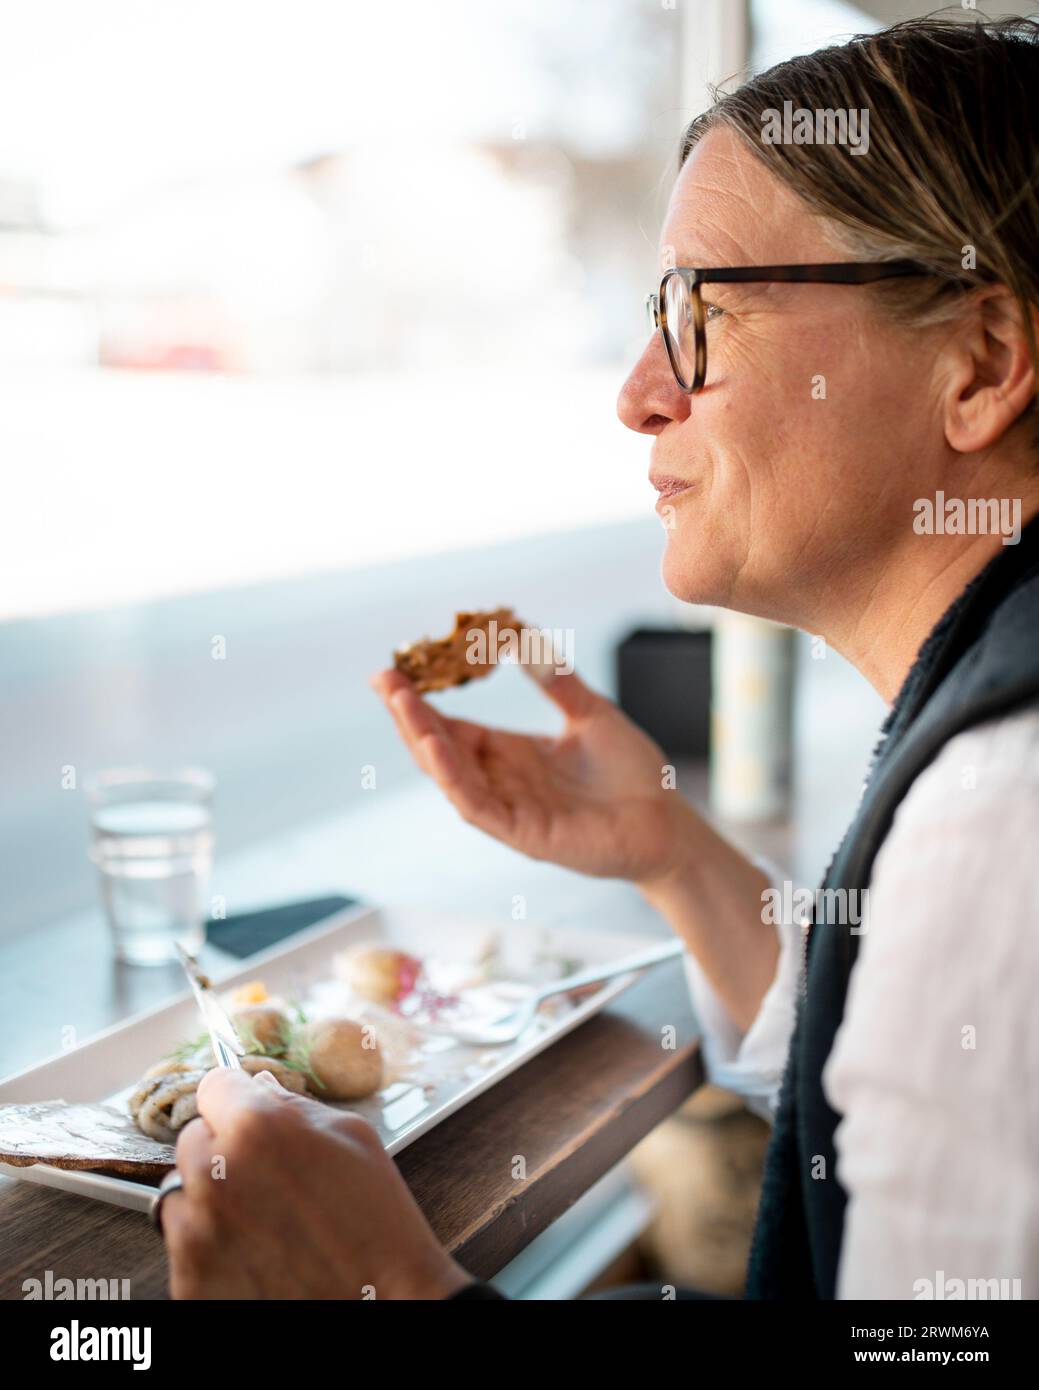 Woman sitting at a restaurant window eating. Stock Photo